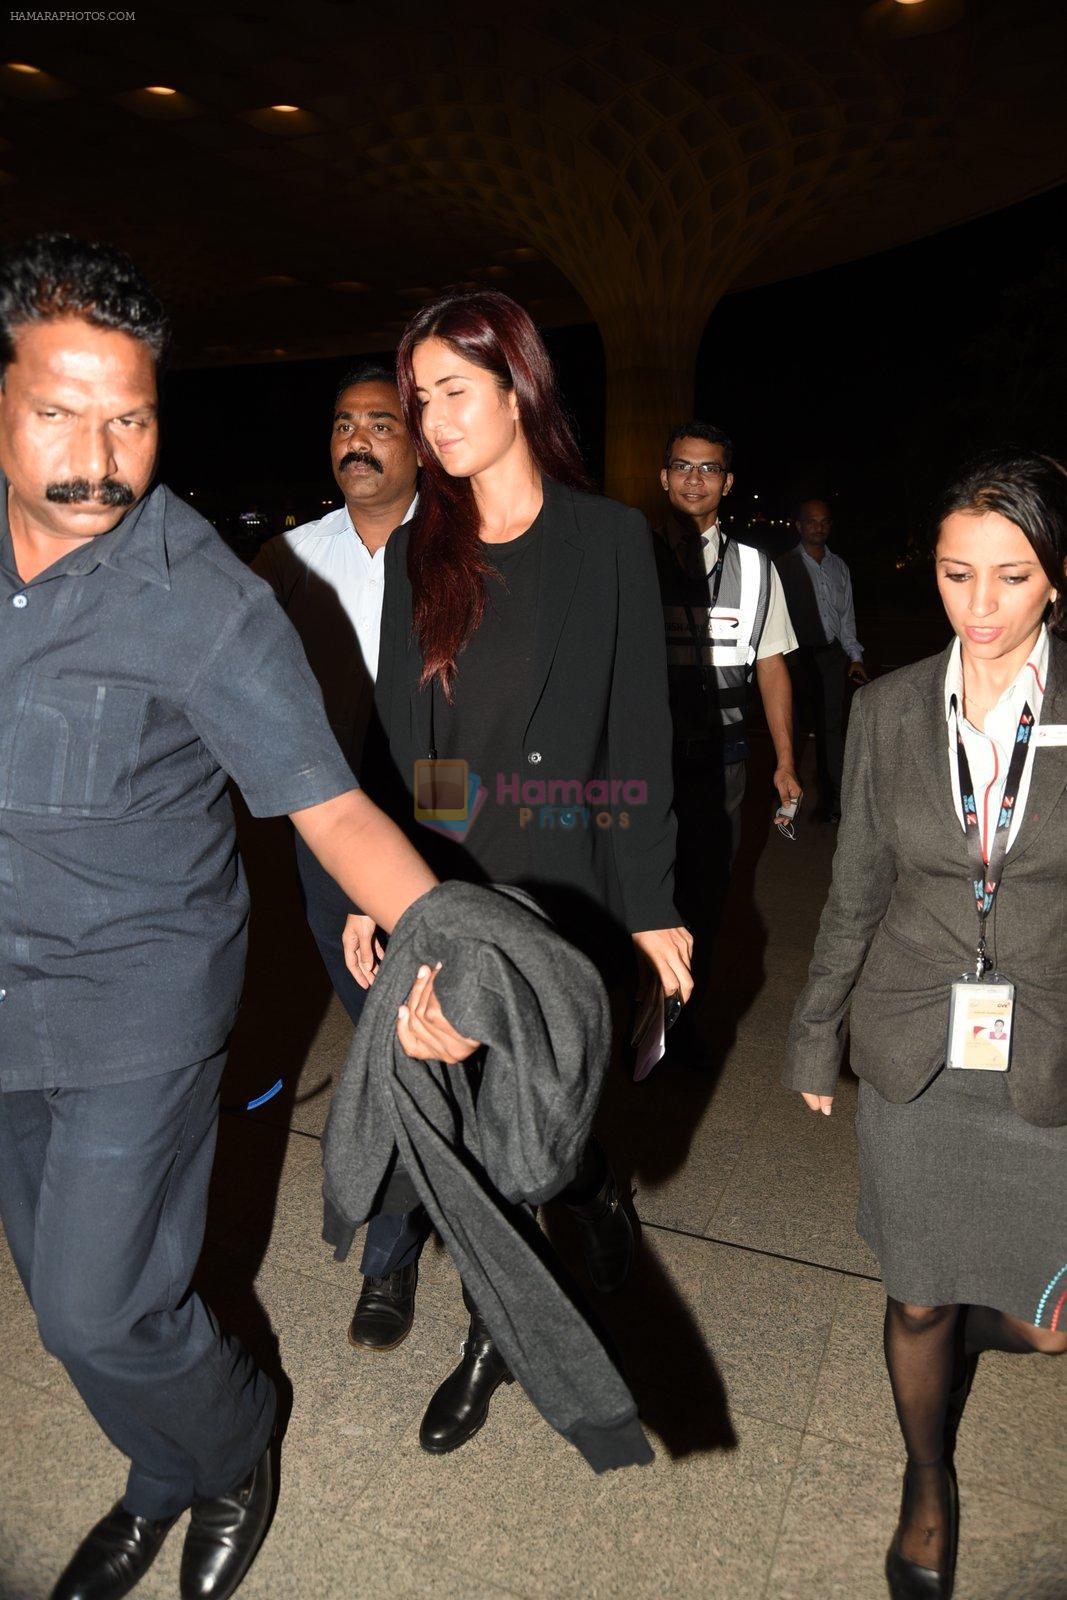 Katrina Kaif Departs for her Cannes Debut on 10th May 2015